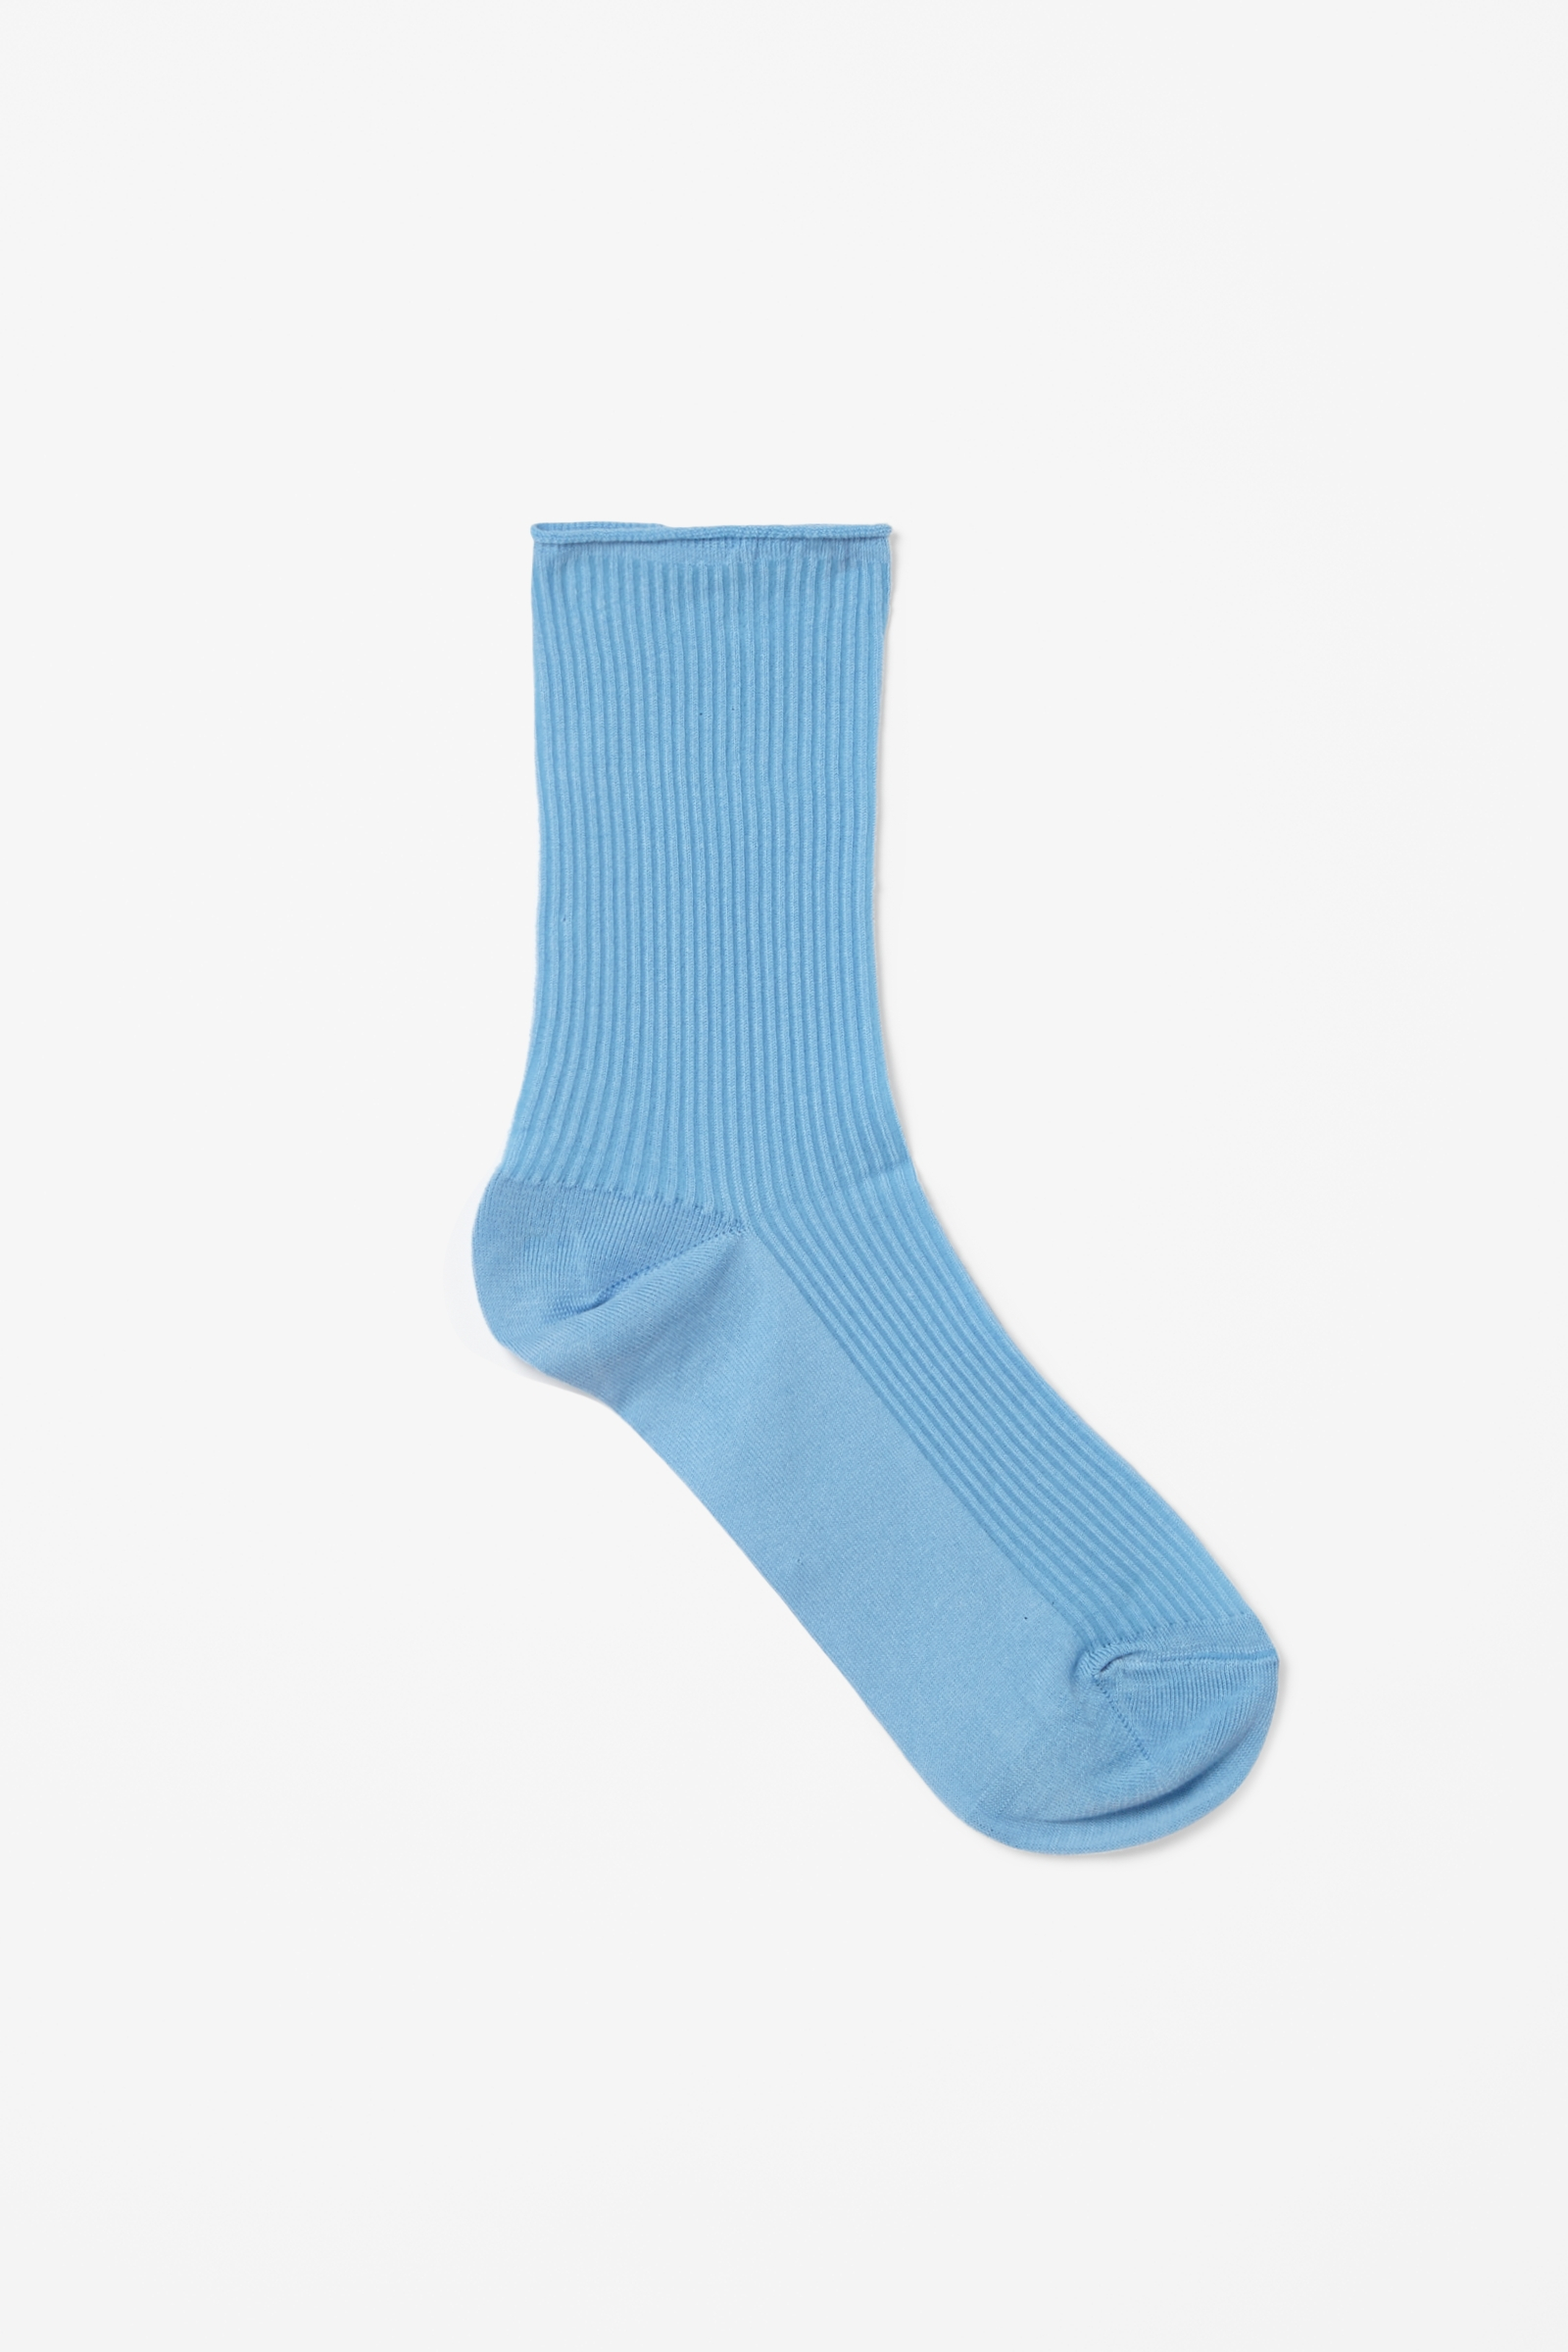 Cos Ribbed Ankle Socks in Blue (Light Blue) | Lyst